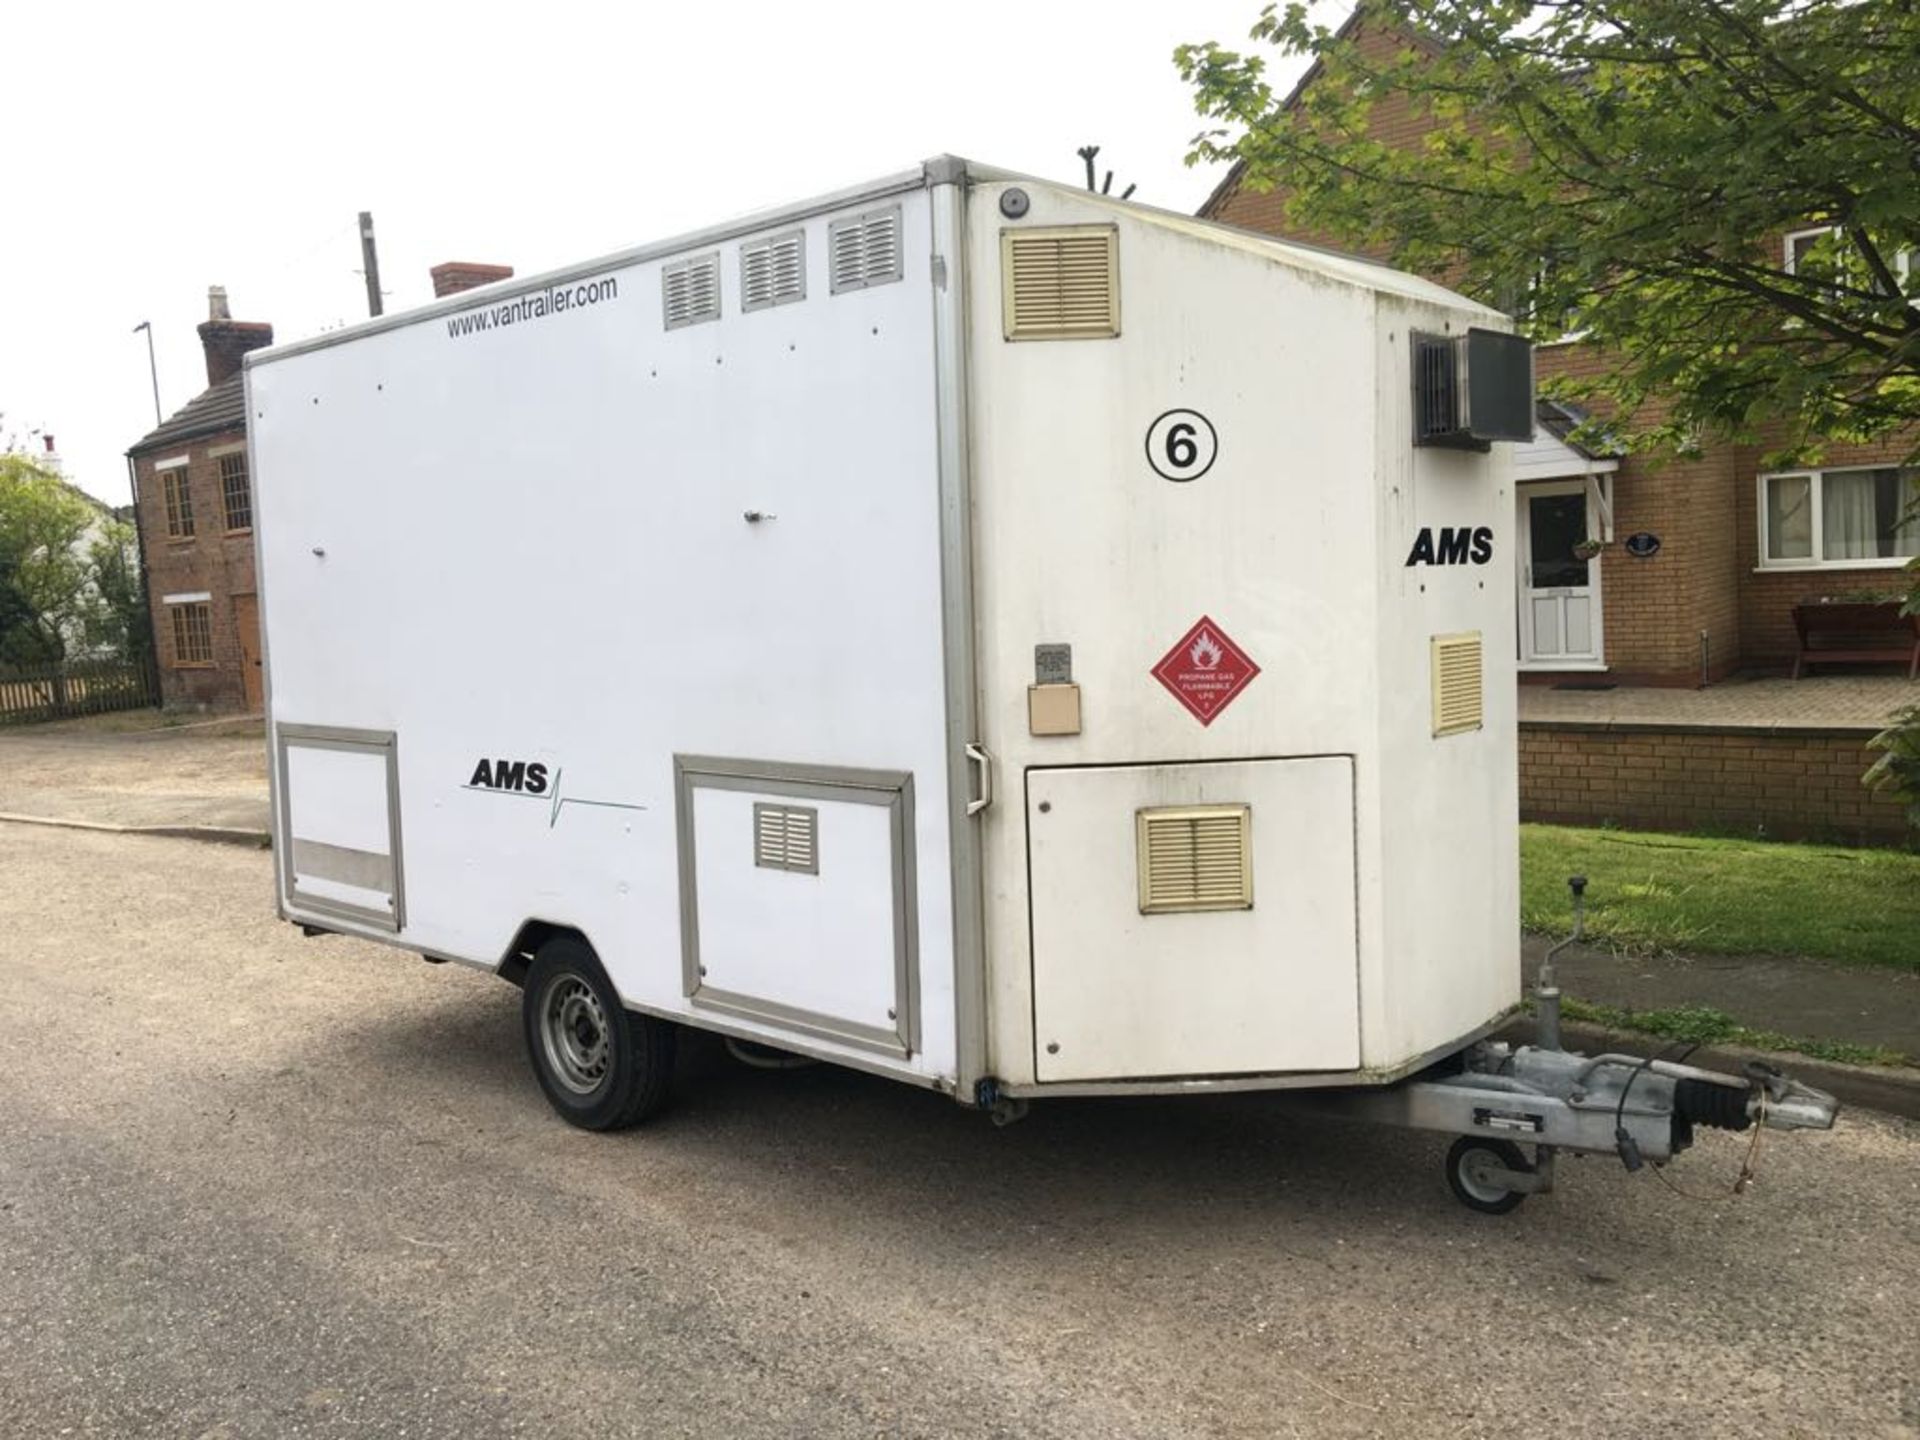 MOBILE TRAILER AMS TWIN SHOWER DECONTAMINATION UNIT AND CHANGING ROOMS